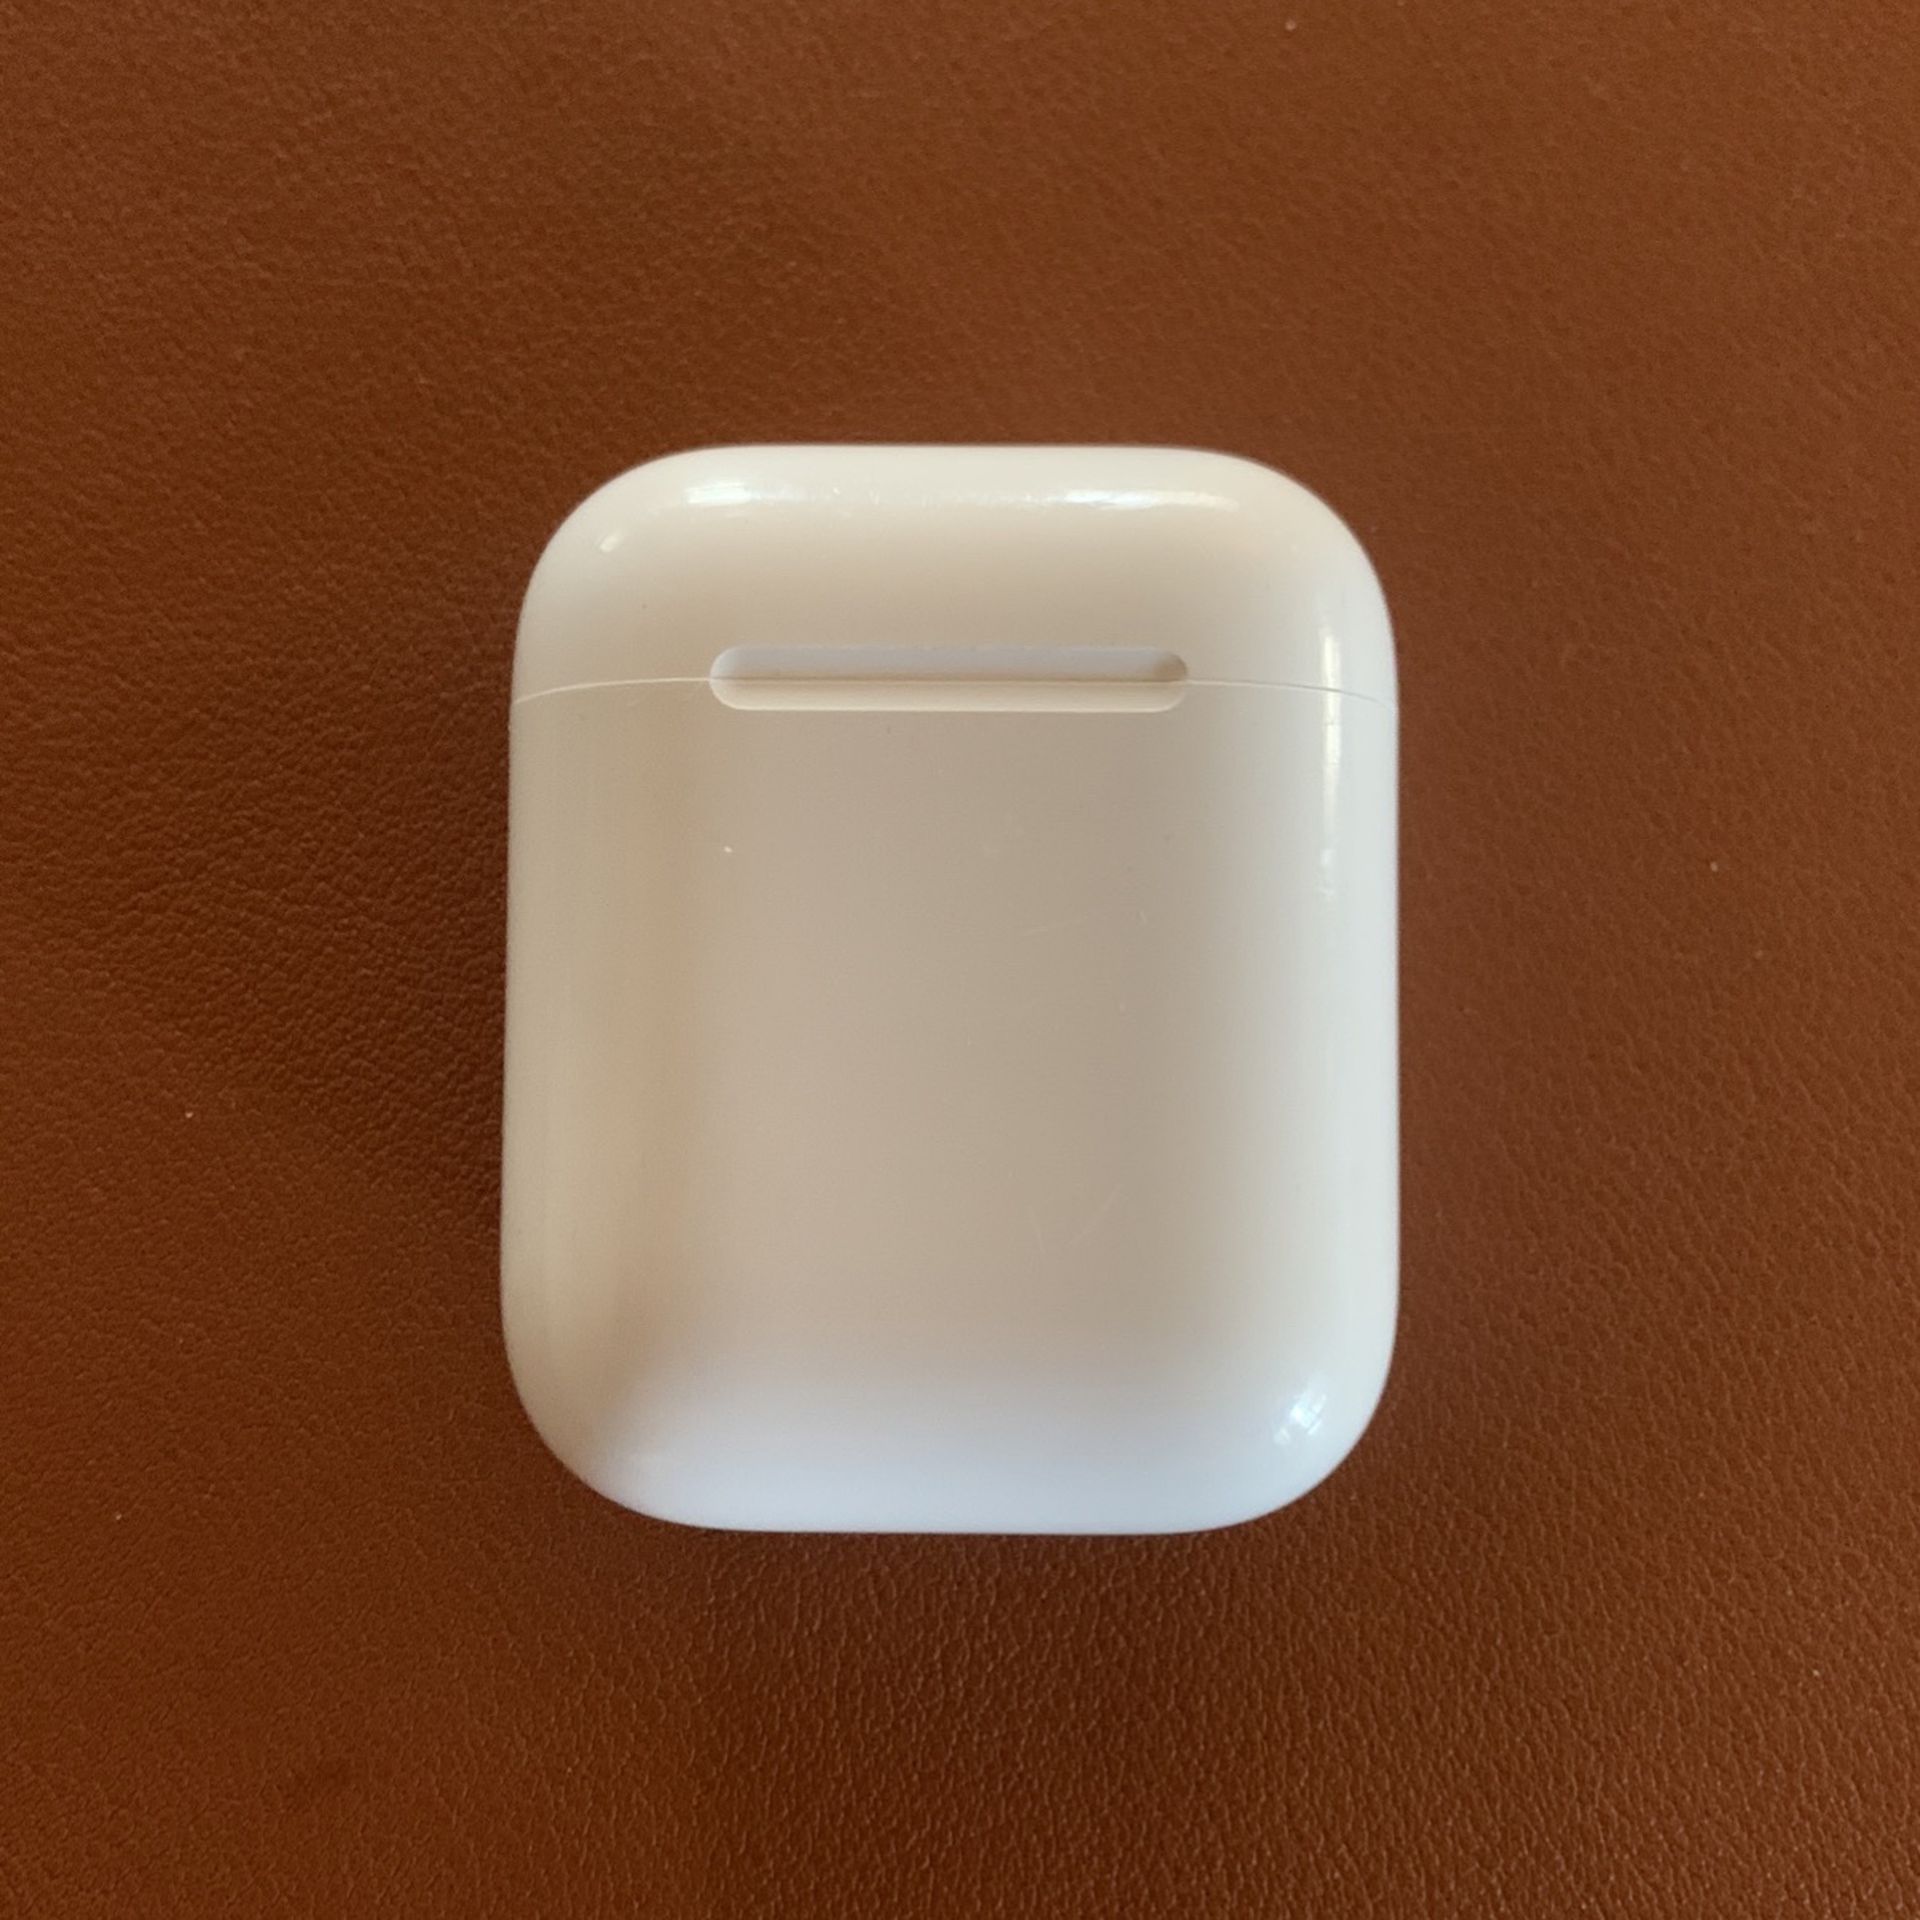 Apple AirPods (Charging Case Only)